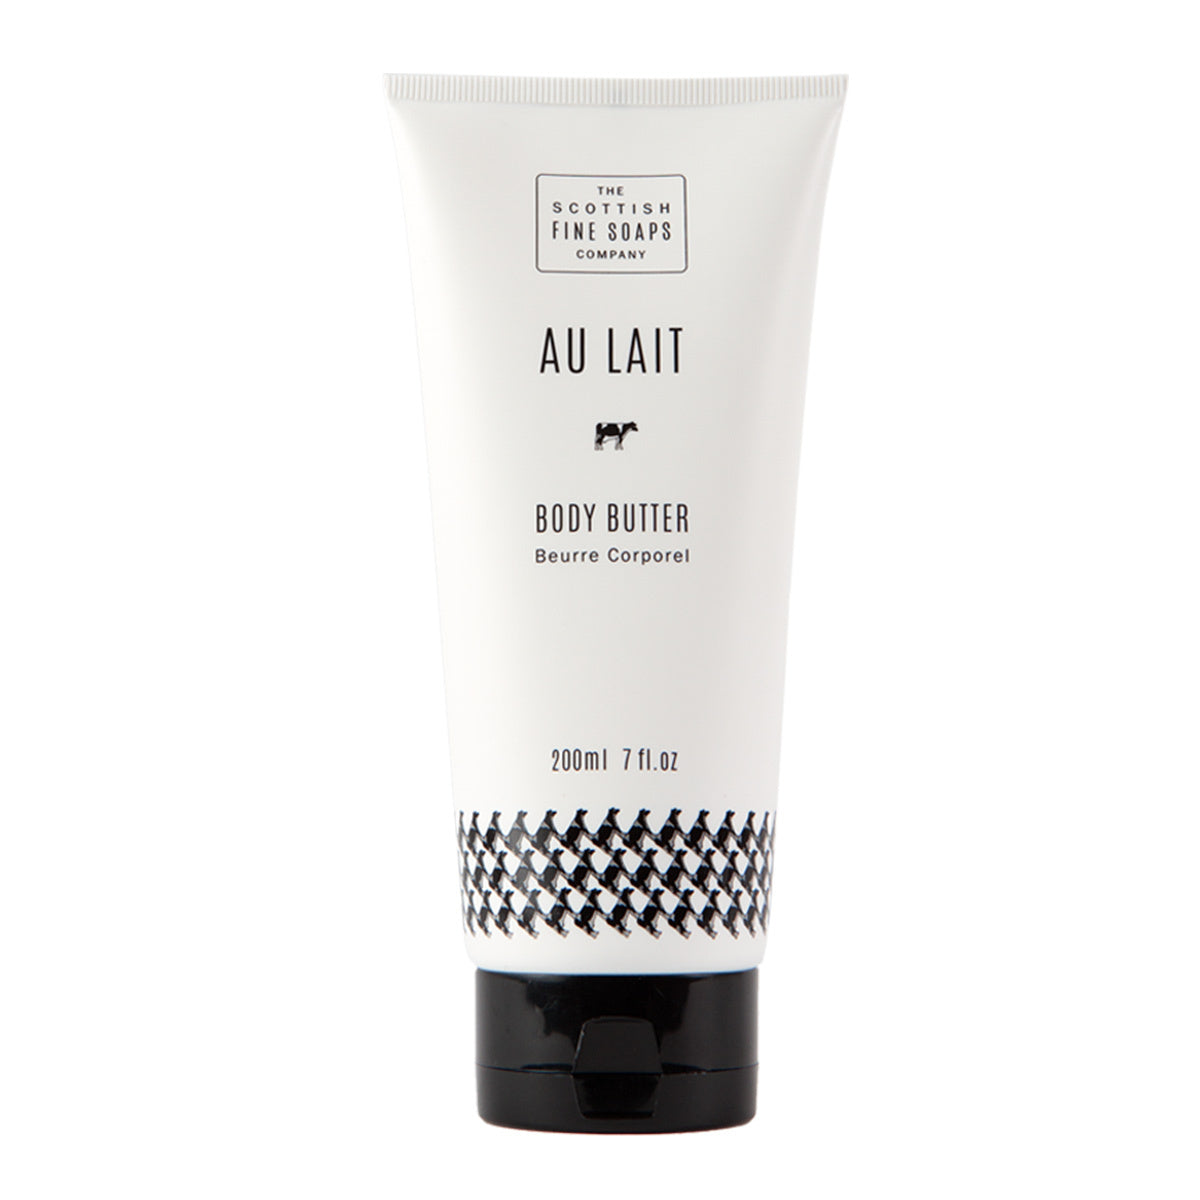 Primary image of Au Lait Milk Body Butter in a Tube